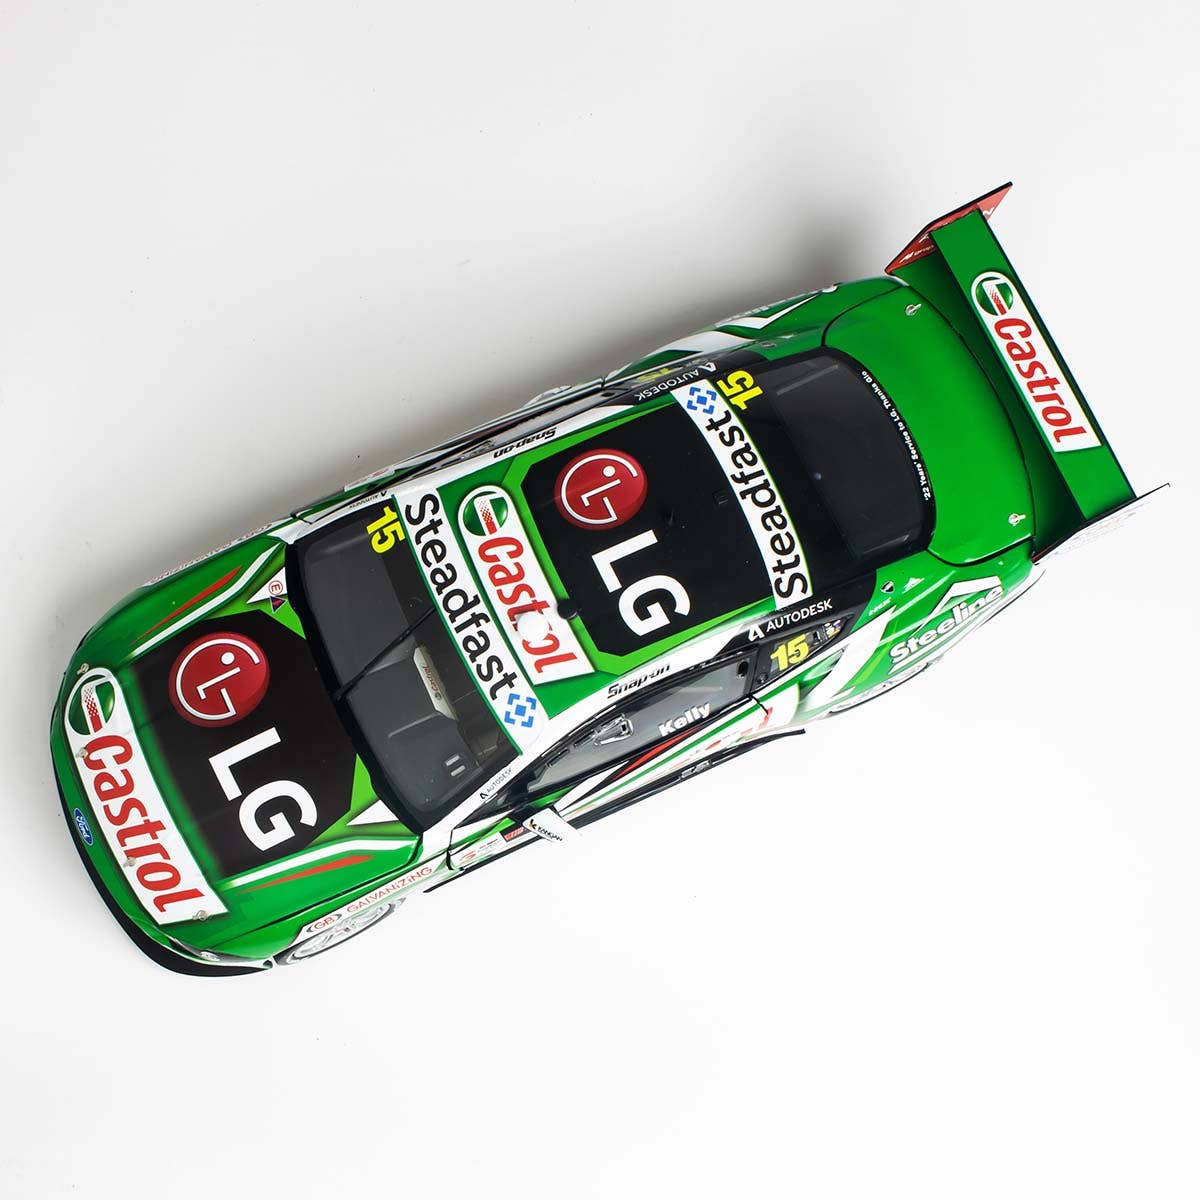 Ford Mustang - Castrol Racing - #15, R.Kelly - Race 26, Repco SuperSprint The Bend - Diecast Model Car